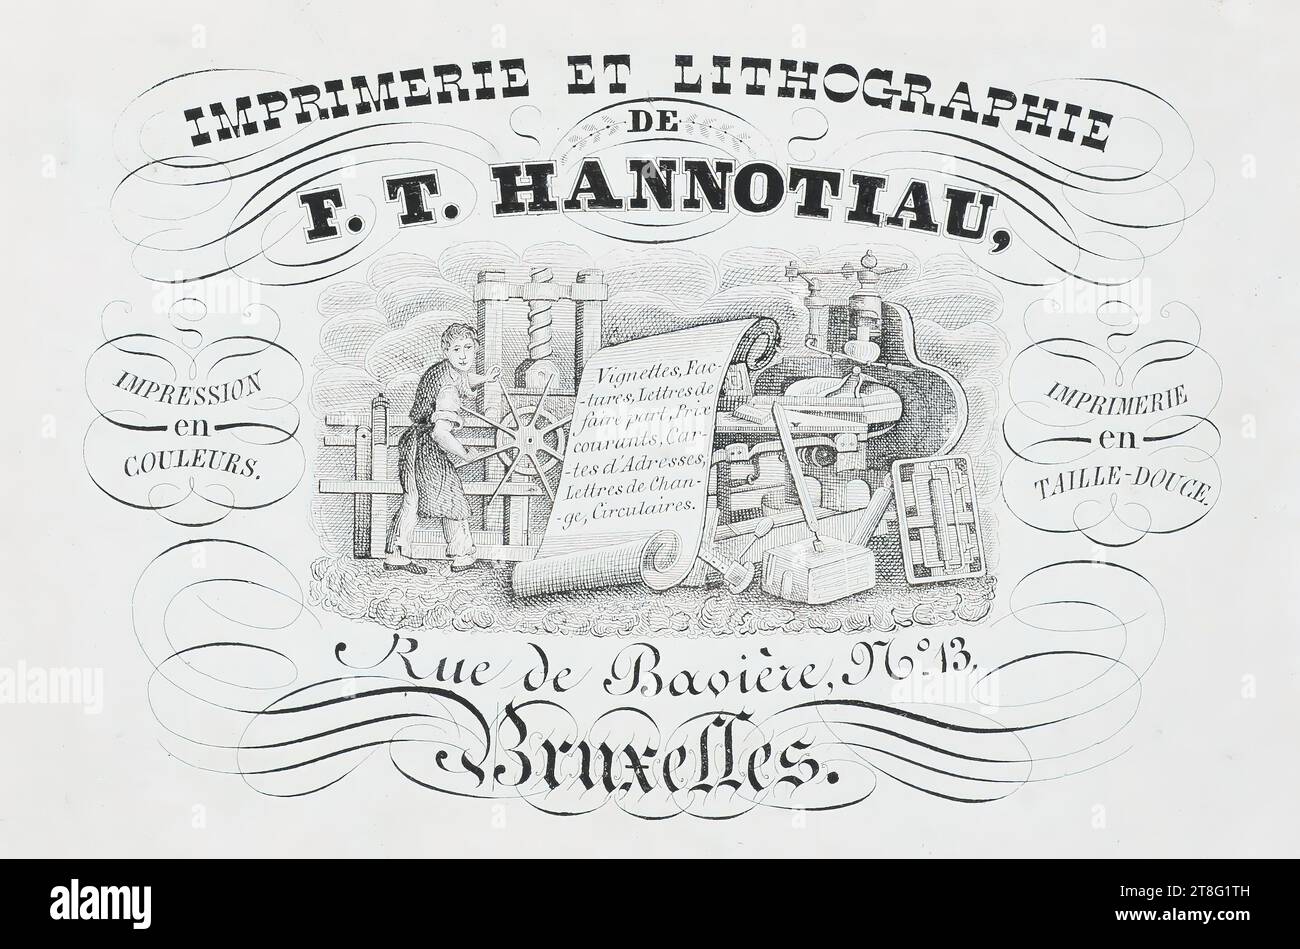 Advertising printing. Business cards. PRINTING AND LITHOGRAPHY, BY, F. T. HANNOTIAU,. PRINTING, and, COLORS. Thumbnails, Invoices, -tures, Letters, announcements, Prices, currents, Cards, -tes of Addresses. Letters of Chang-, -ge, Circulars. PRINTING, in, INtaglio. Bavaria street, no. 13, Brussels Stock Photo